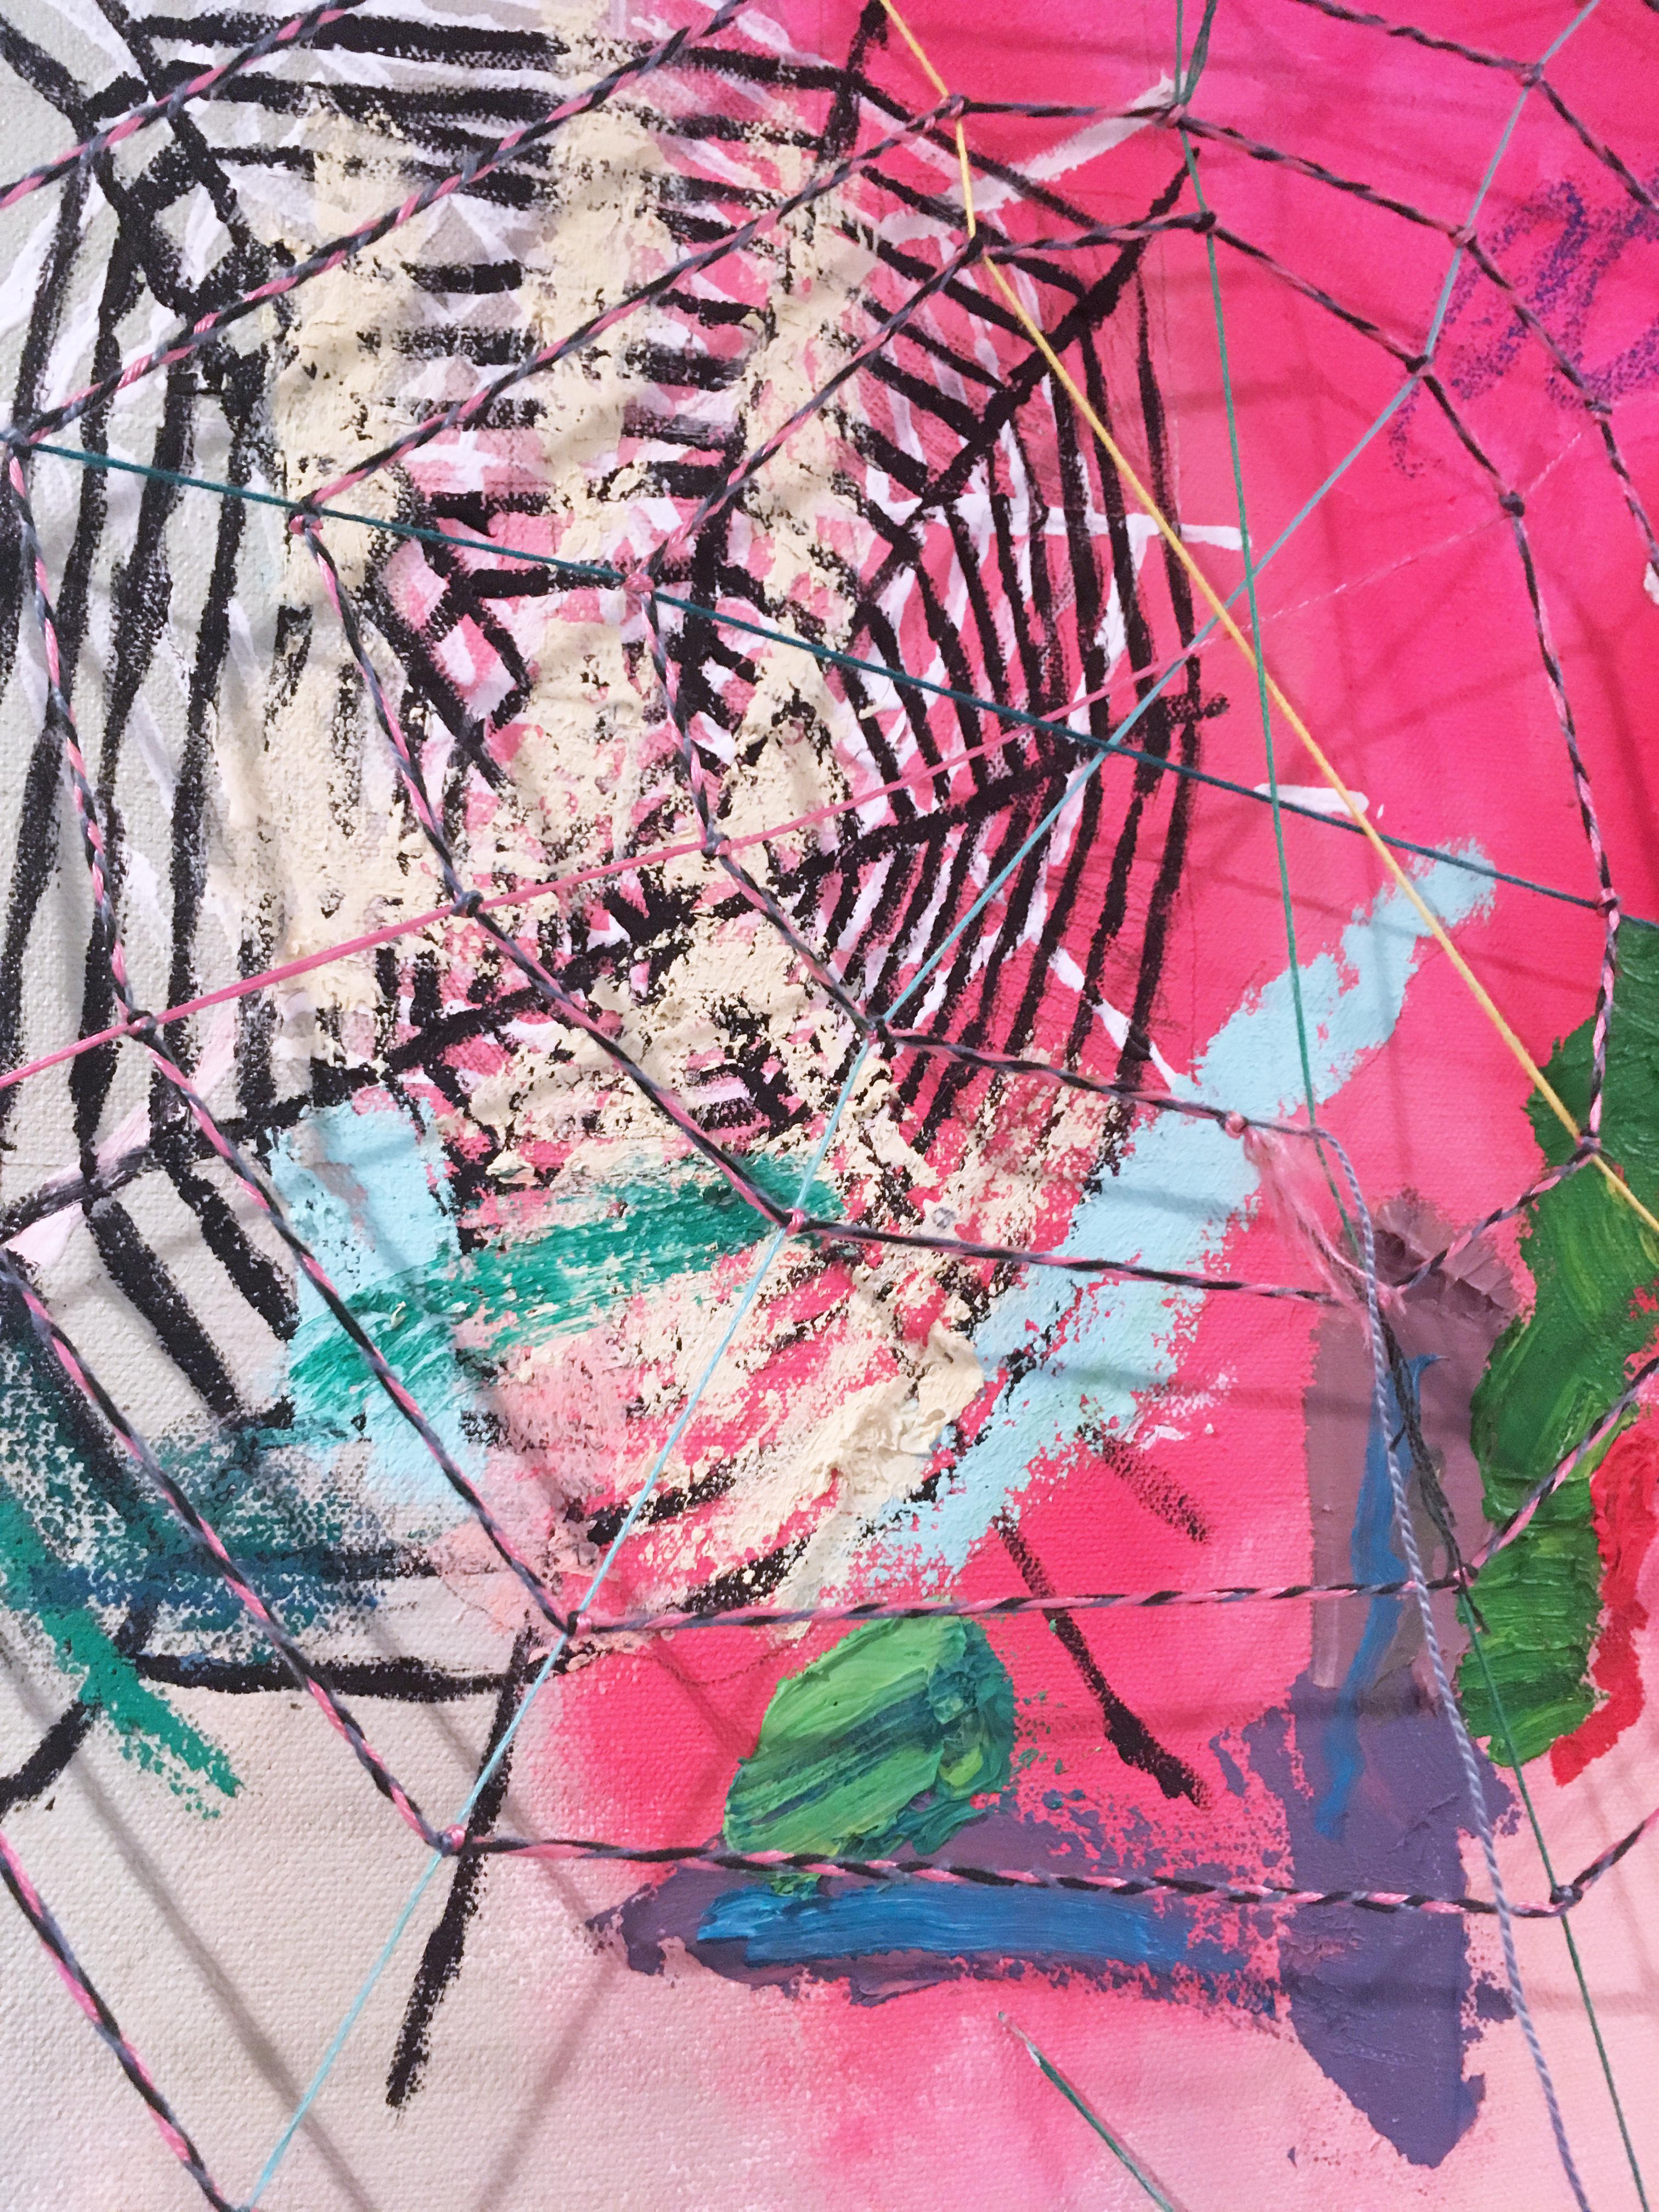 Through Webs, 2020, acrylic, oil, canvas, nails, thread, yellow, pink, abstract 2